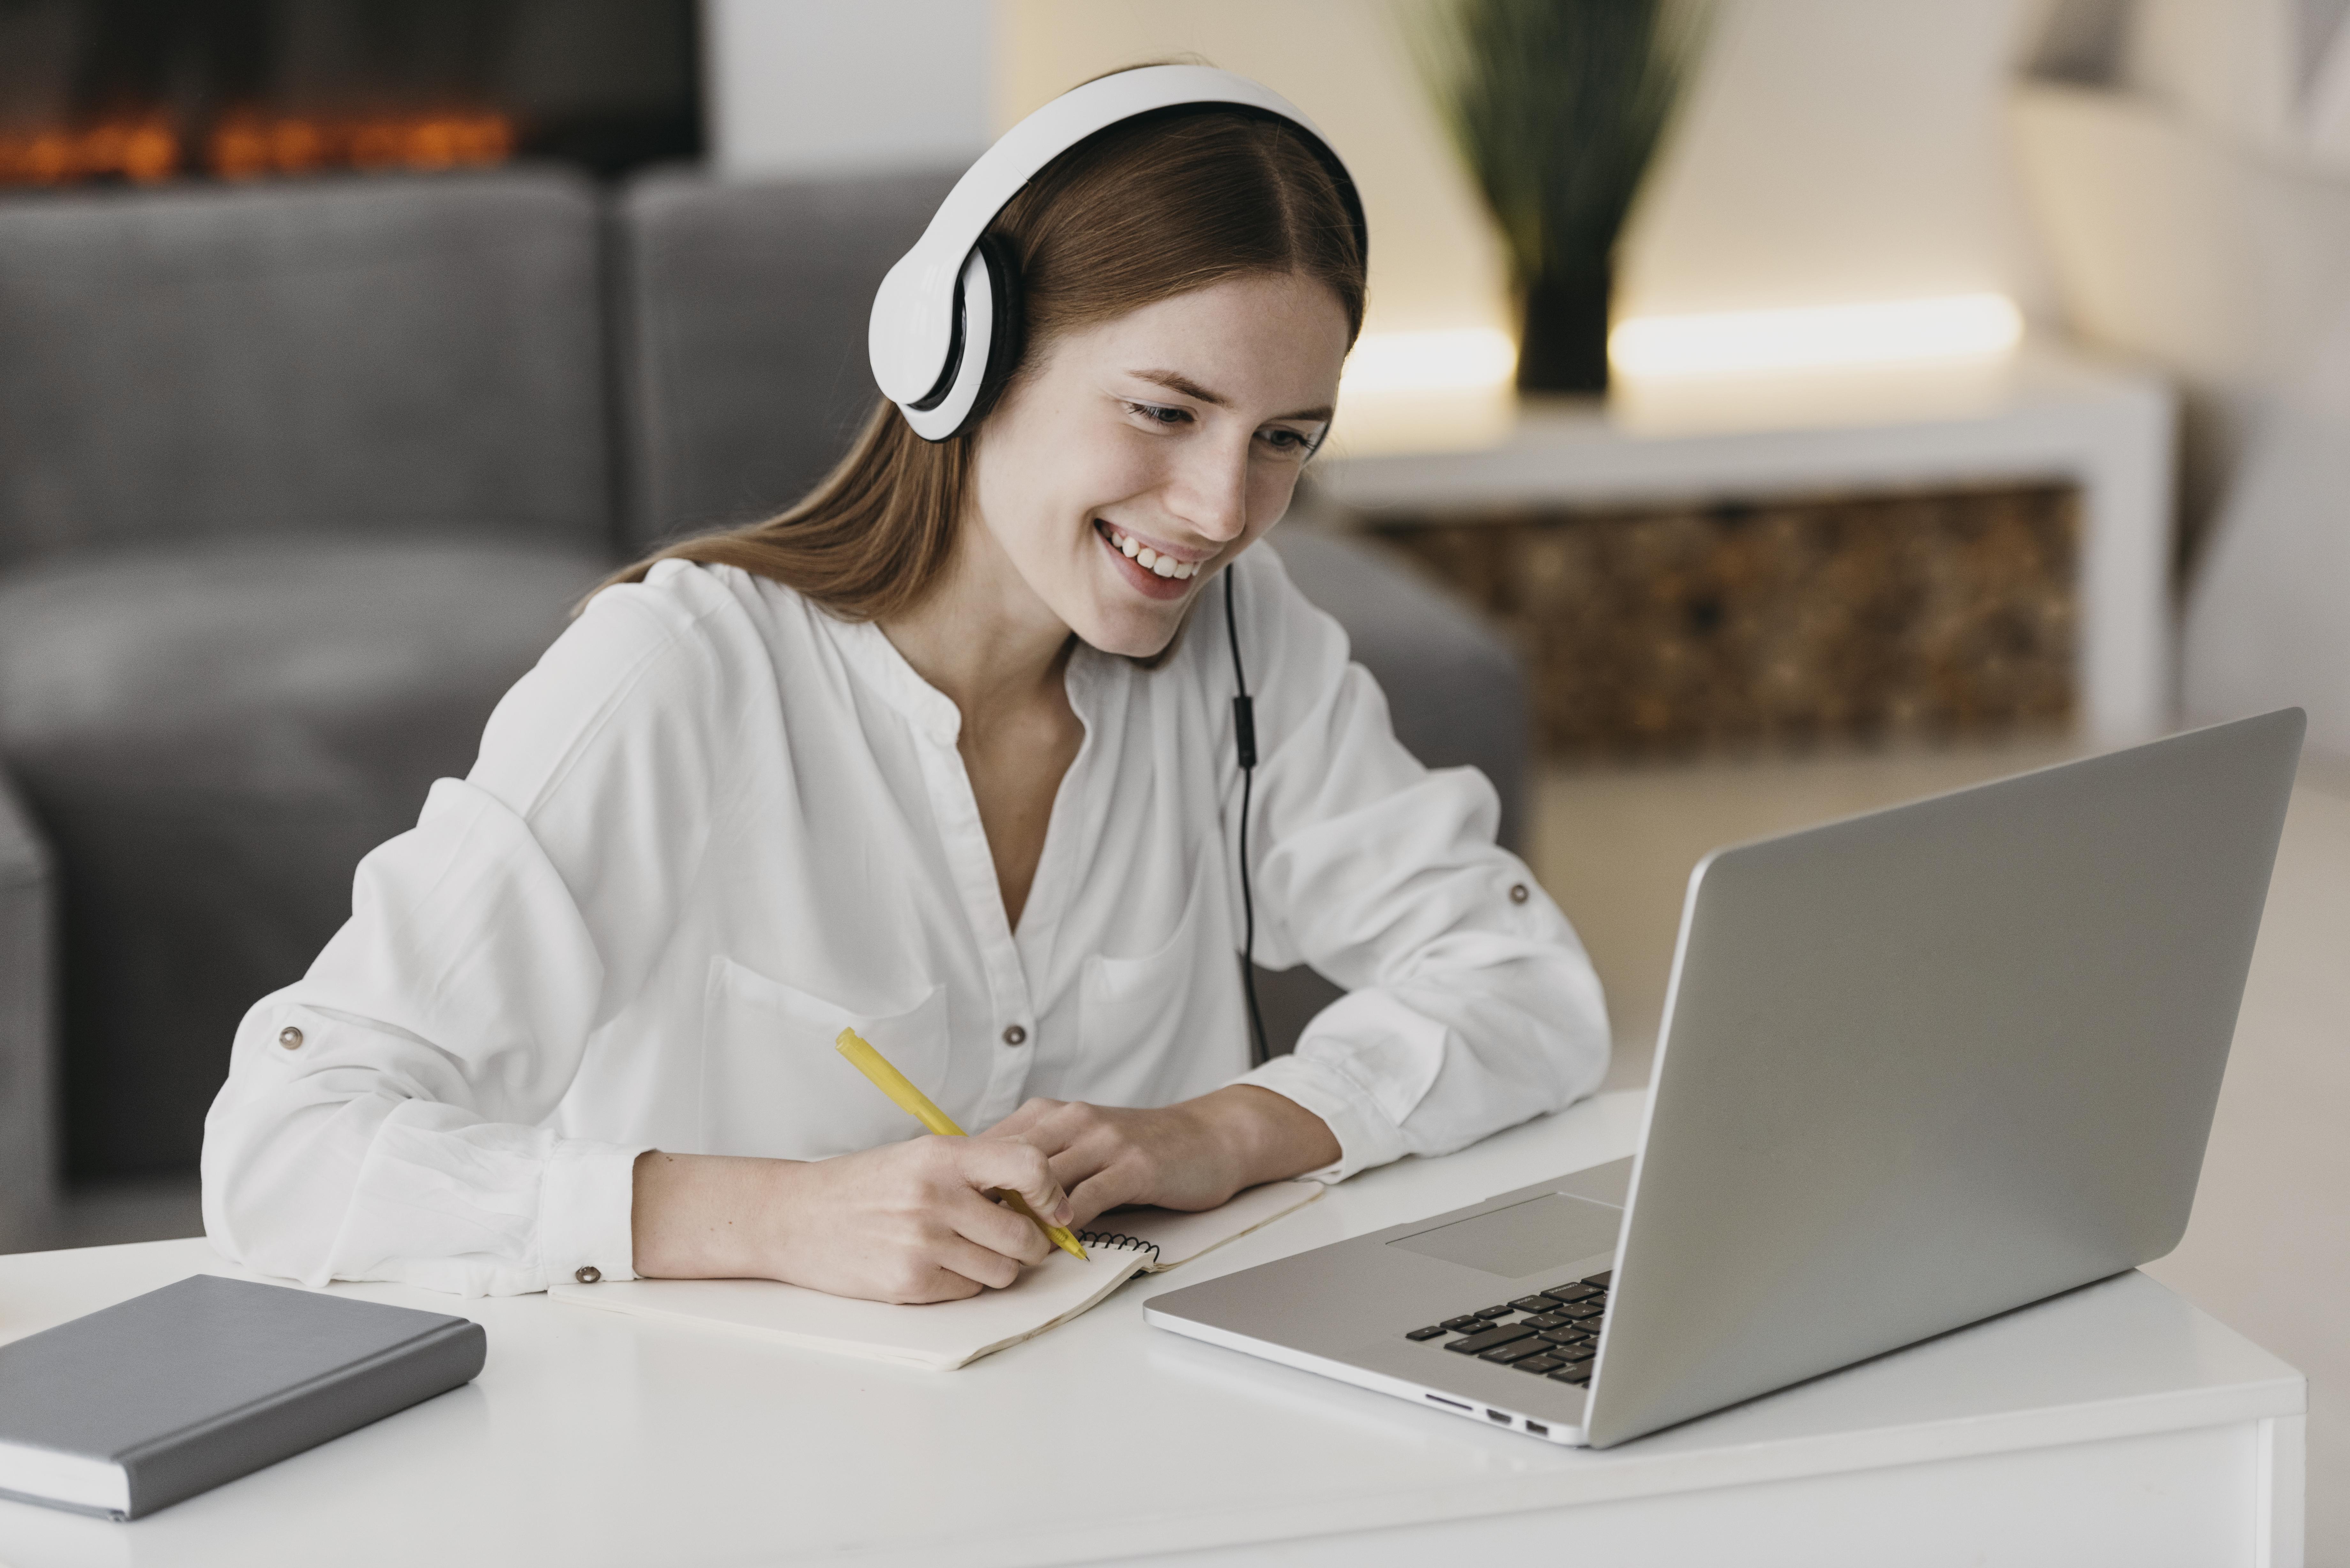 Woman sitting at desk with headphones in front of a laptop